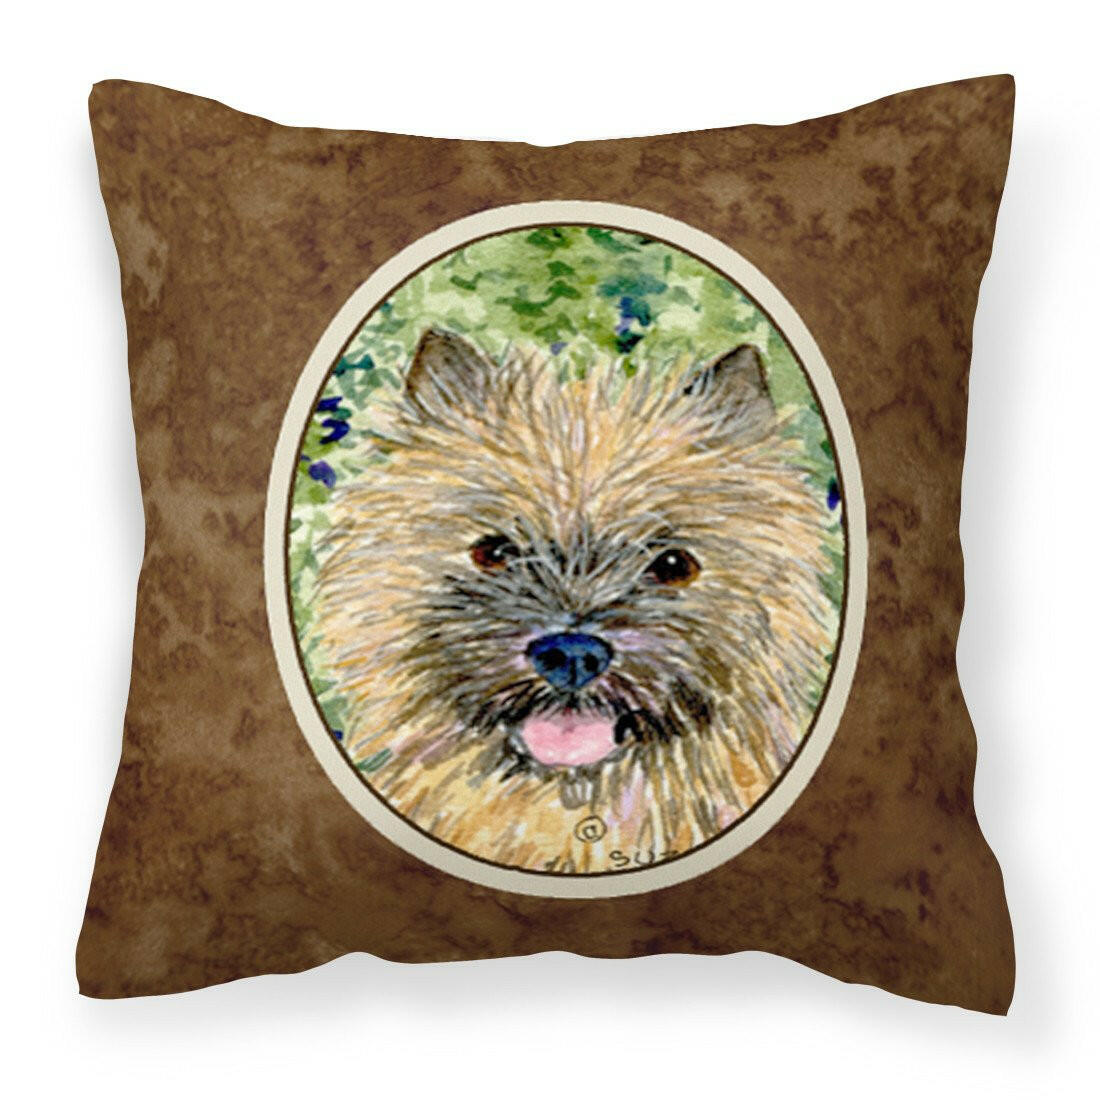 Cairn Terrier Fabric Decorative Pillow SS8799PW1414 by Caroline's Treasures